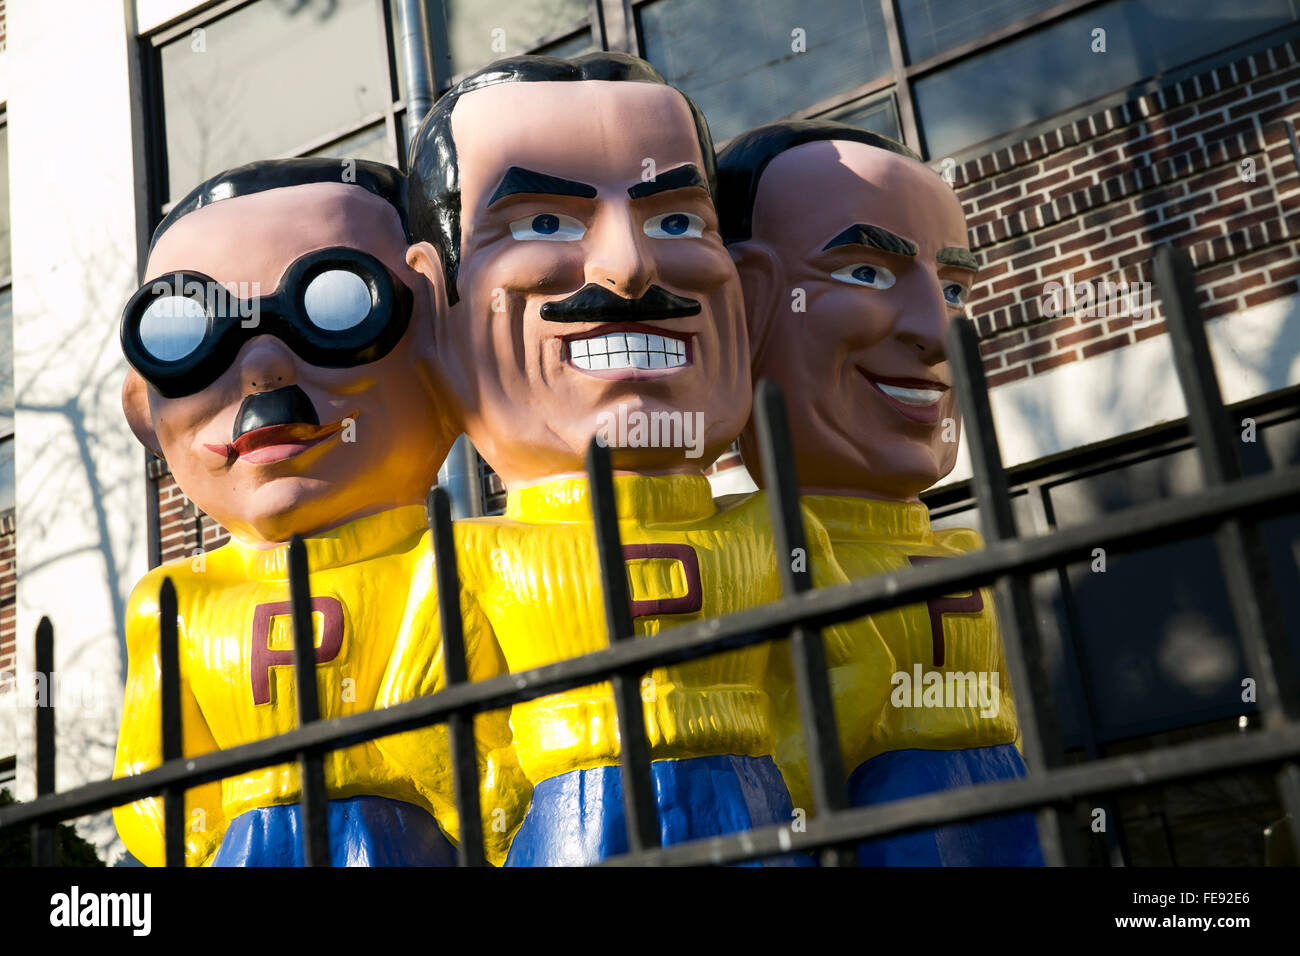 A statue of the Pep Boys: Manny, Moe & Jack outside of the headquarters of Pep Boys in Philadelphia, Pennsylvania on January 3,  Stock Photo